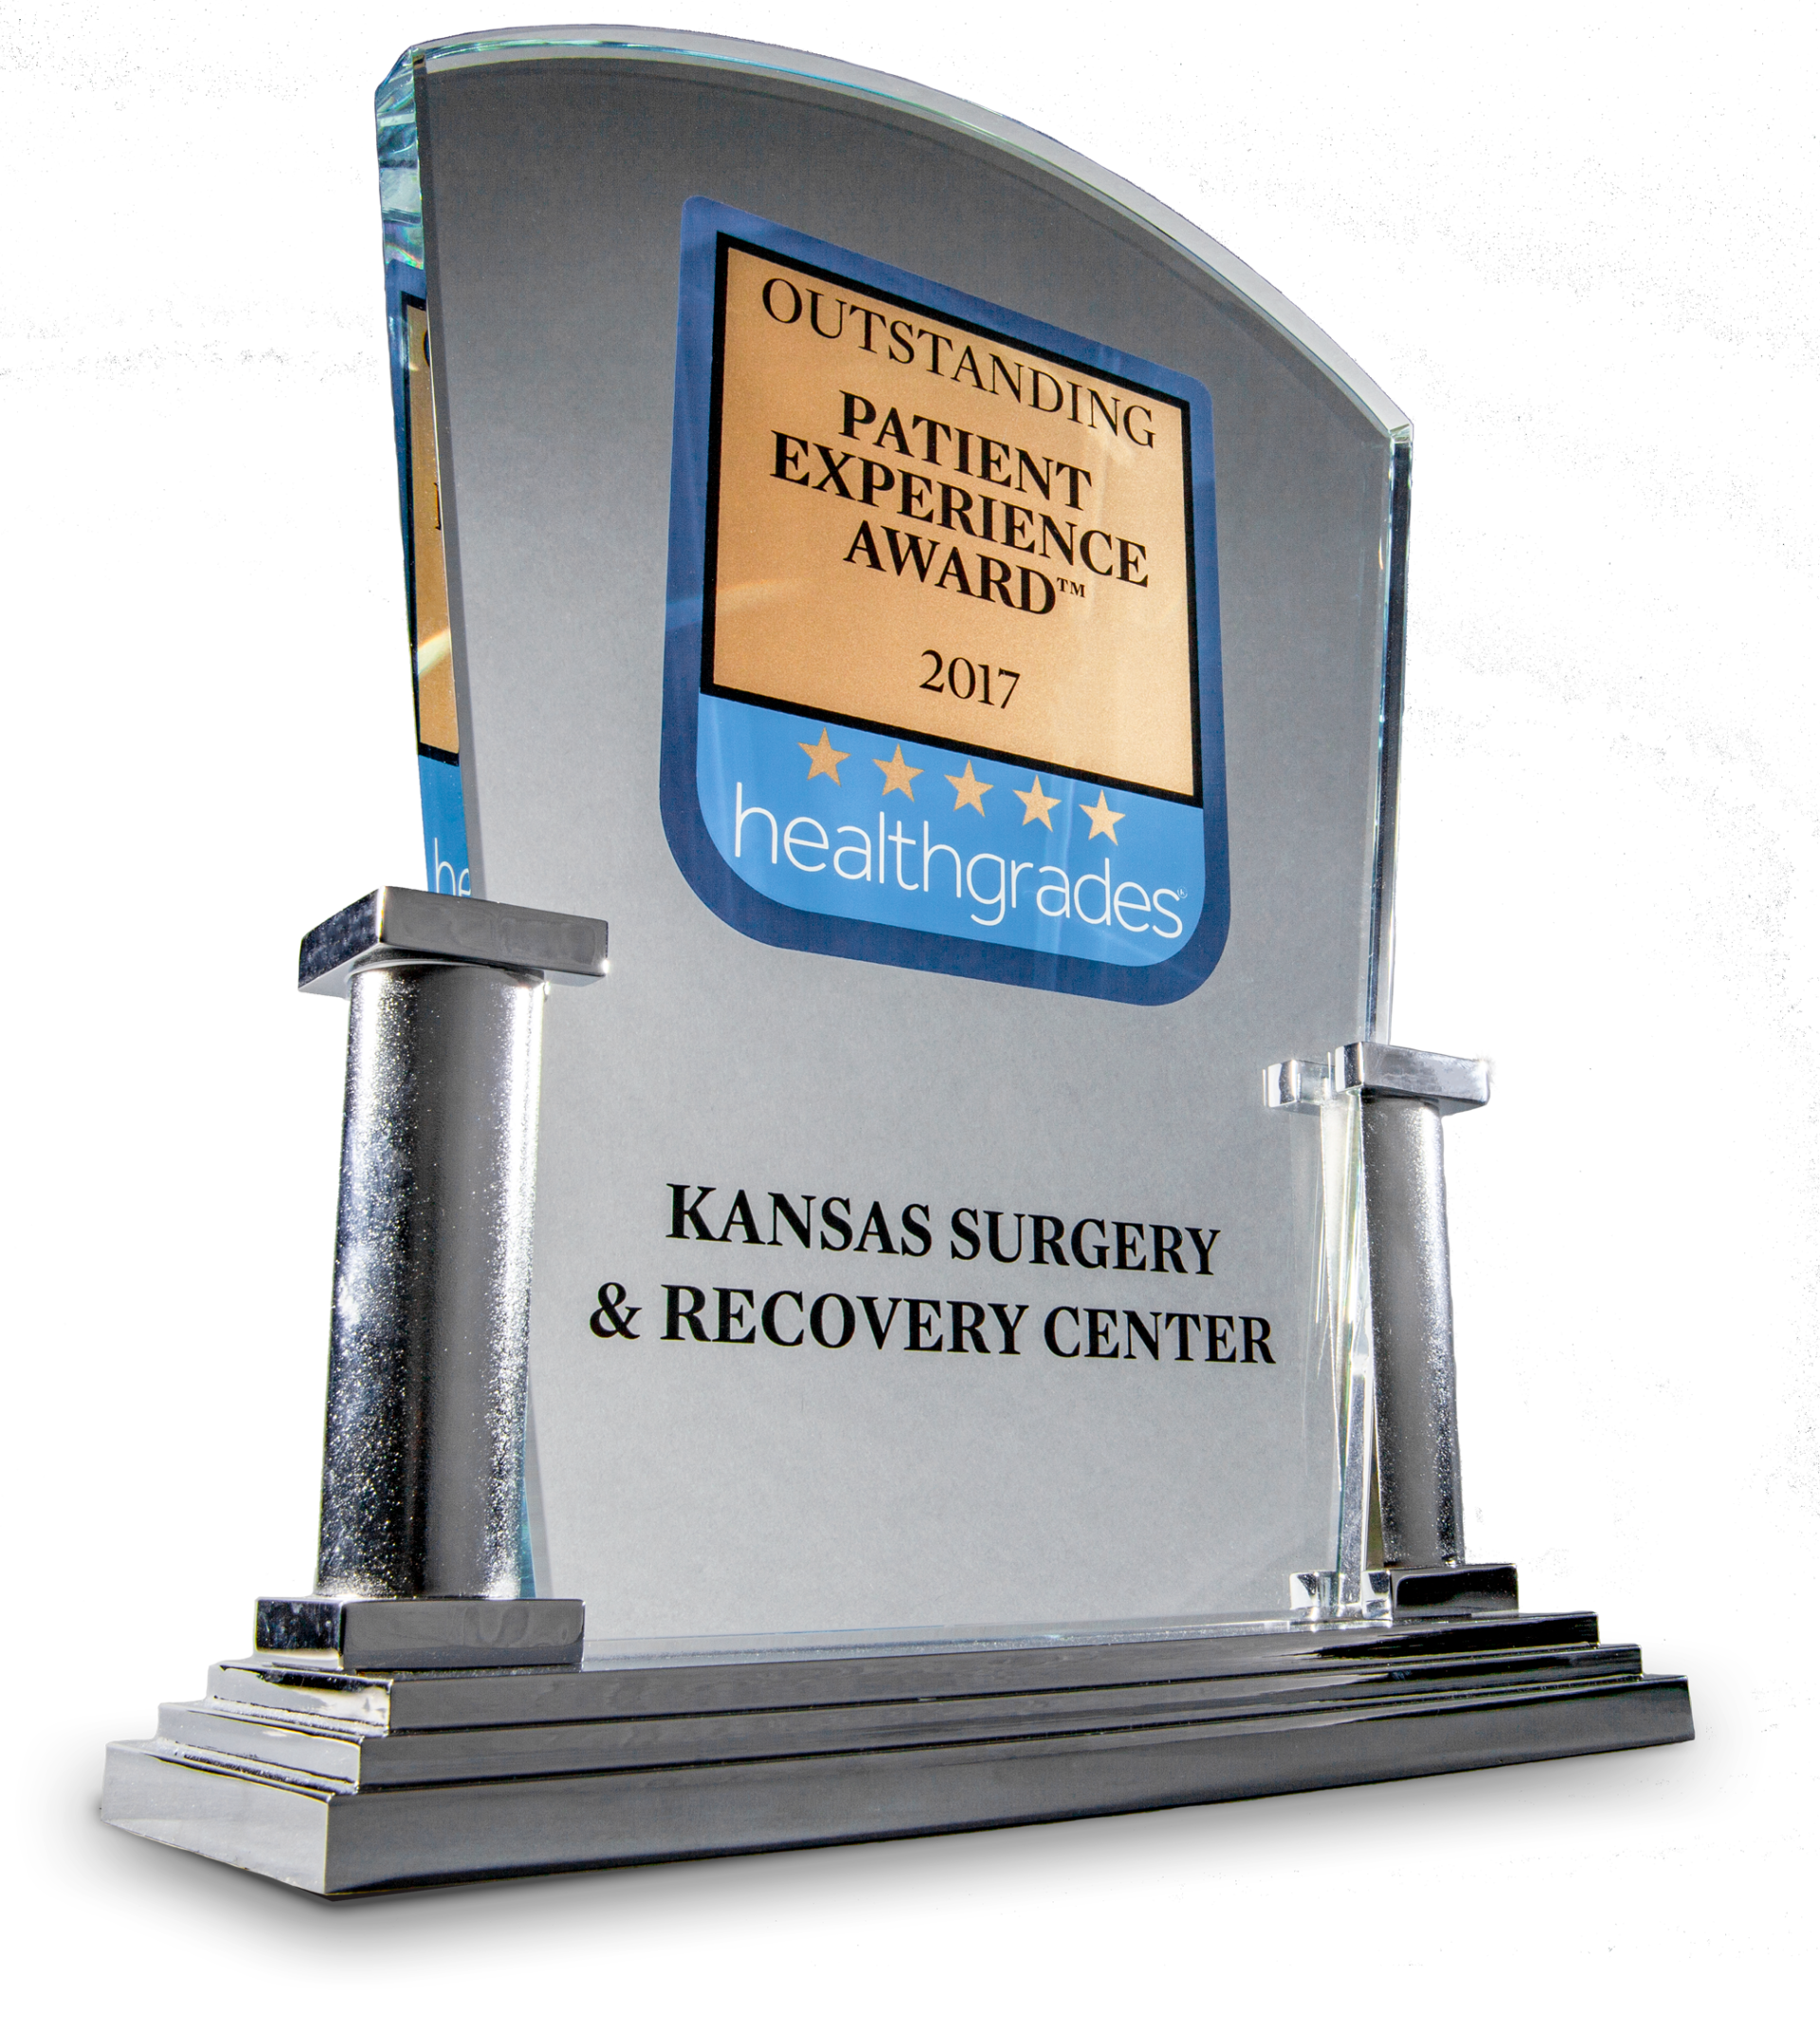 Kansas Surgery and Recovery Center's Outstanding Patient Experience Award was given by Healthgrades for twenty-seventeen